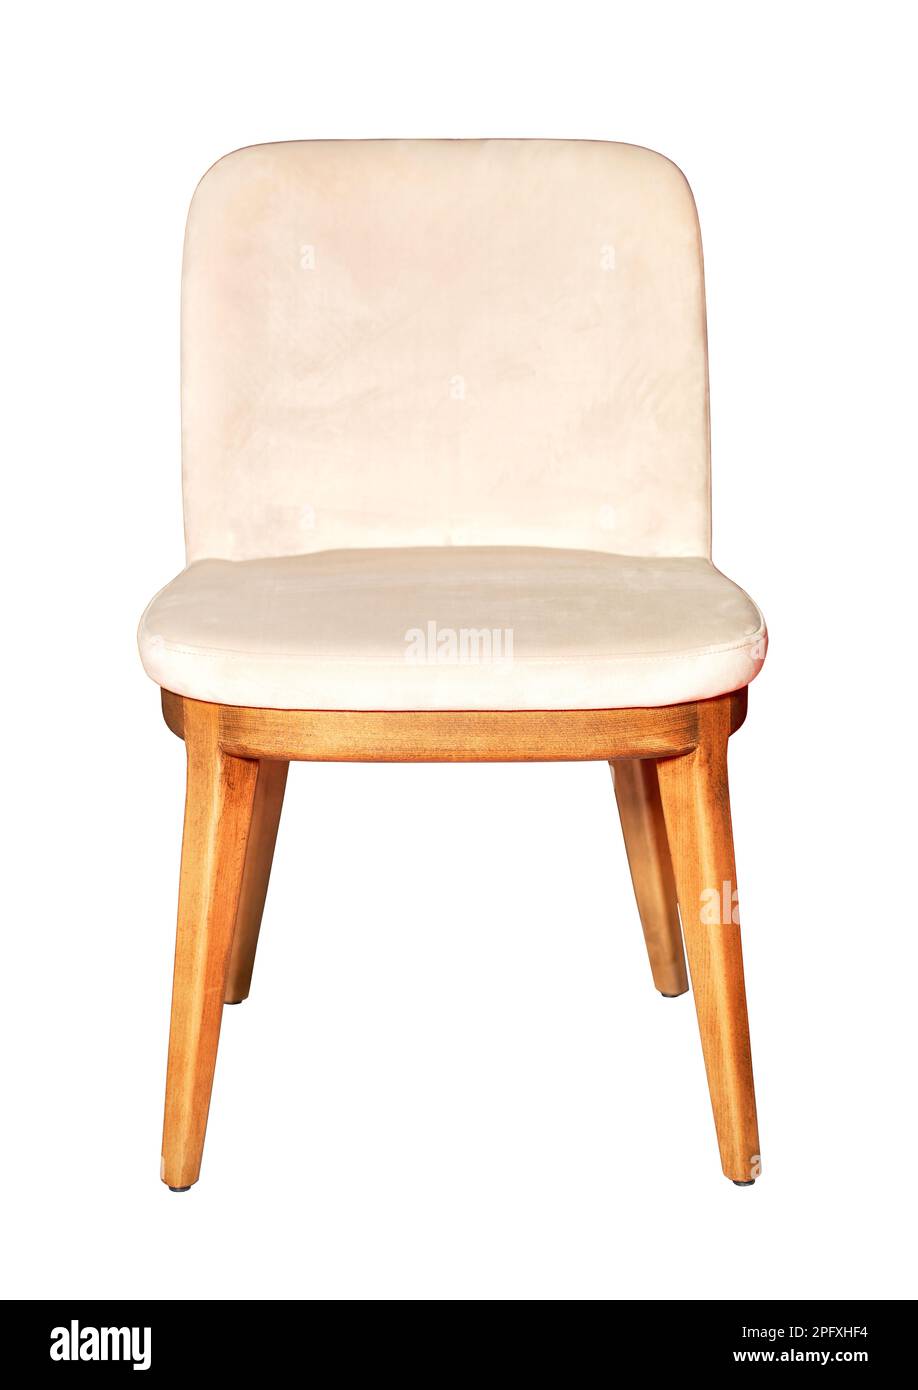 A comfortable dining chair with a wooden frame and cream velor upholstery. The image is isolated on a white background. Stock Photo